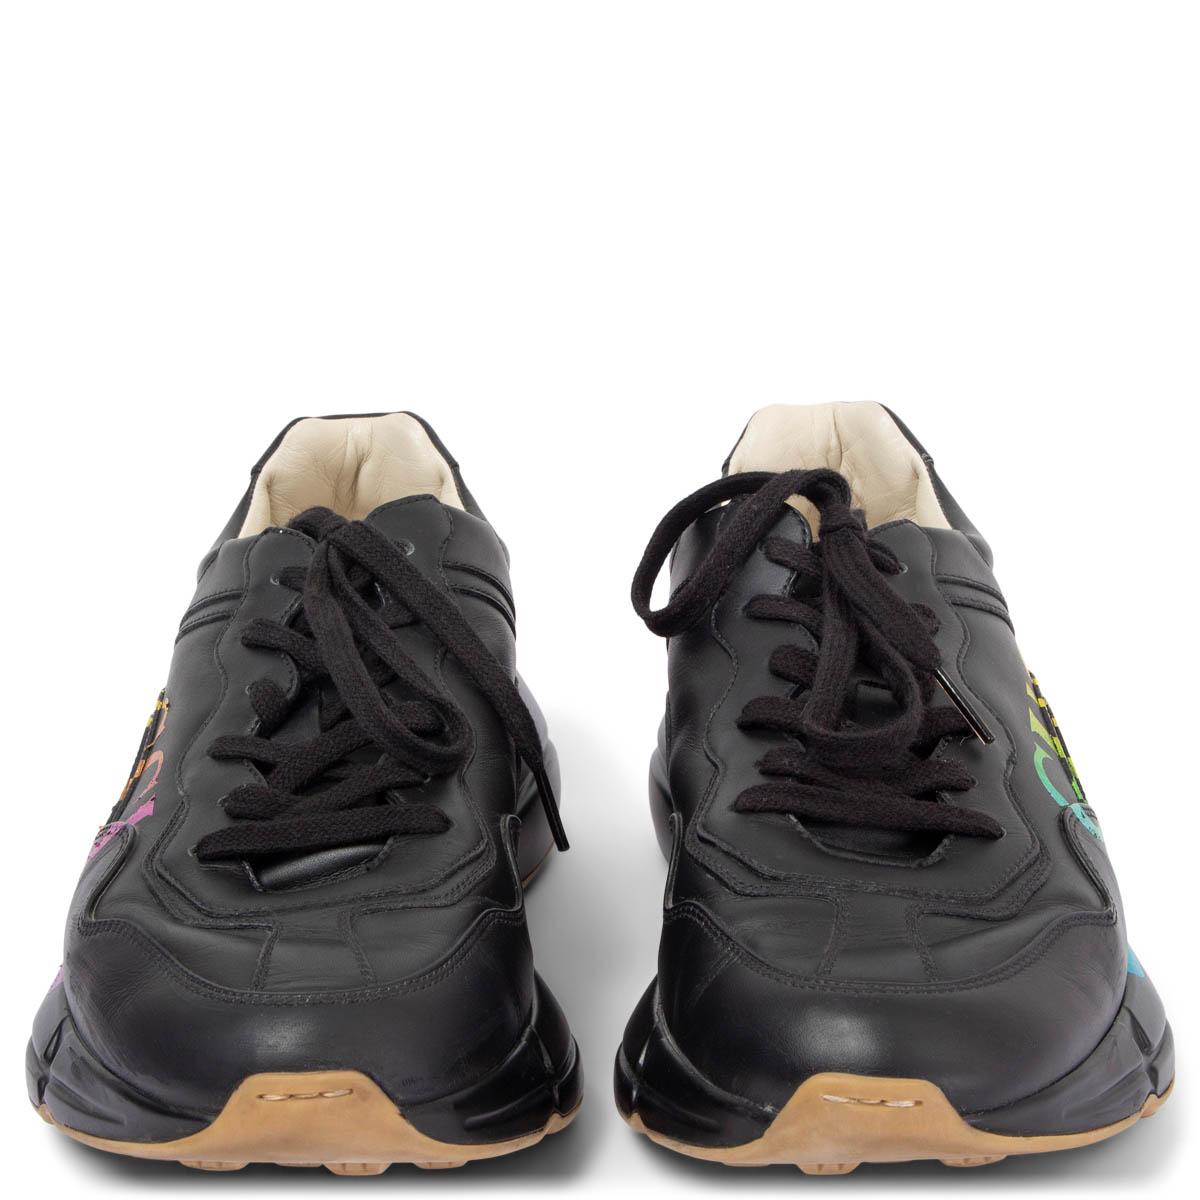 100% authentic Gucci Rhyton Rainbow sneakers in black, green, yellow, orange and pink calfskin featuring black rubber sole. Have been worn and are in excellent condition. 

Measurements
Imprinted Size 8
Shoe Size	Mens 8.5/42 or Women's 40
Inside